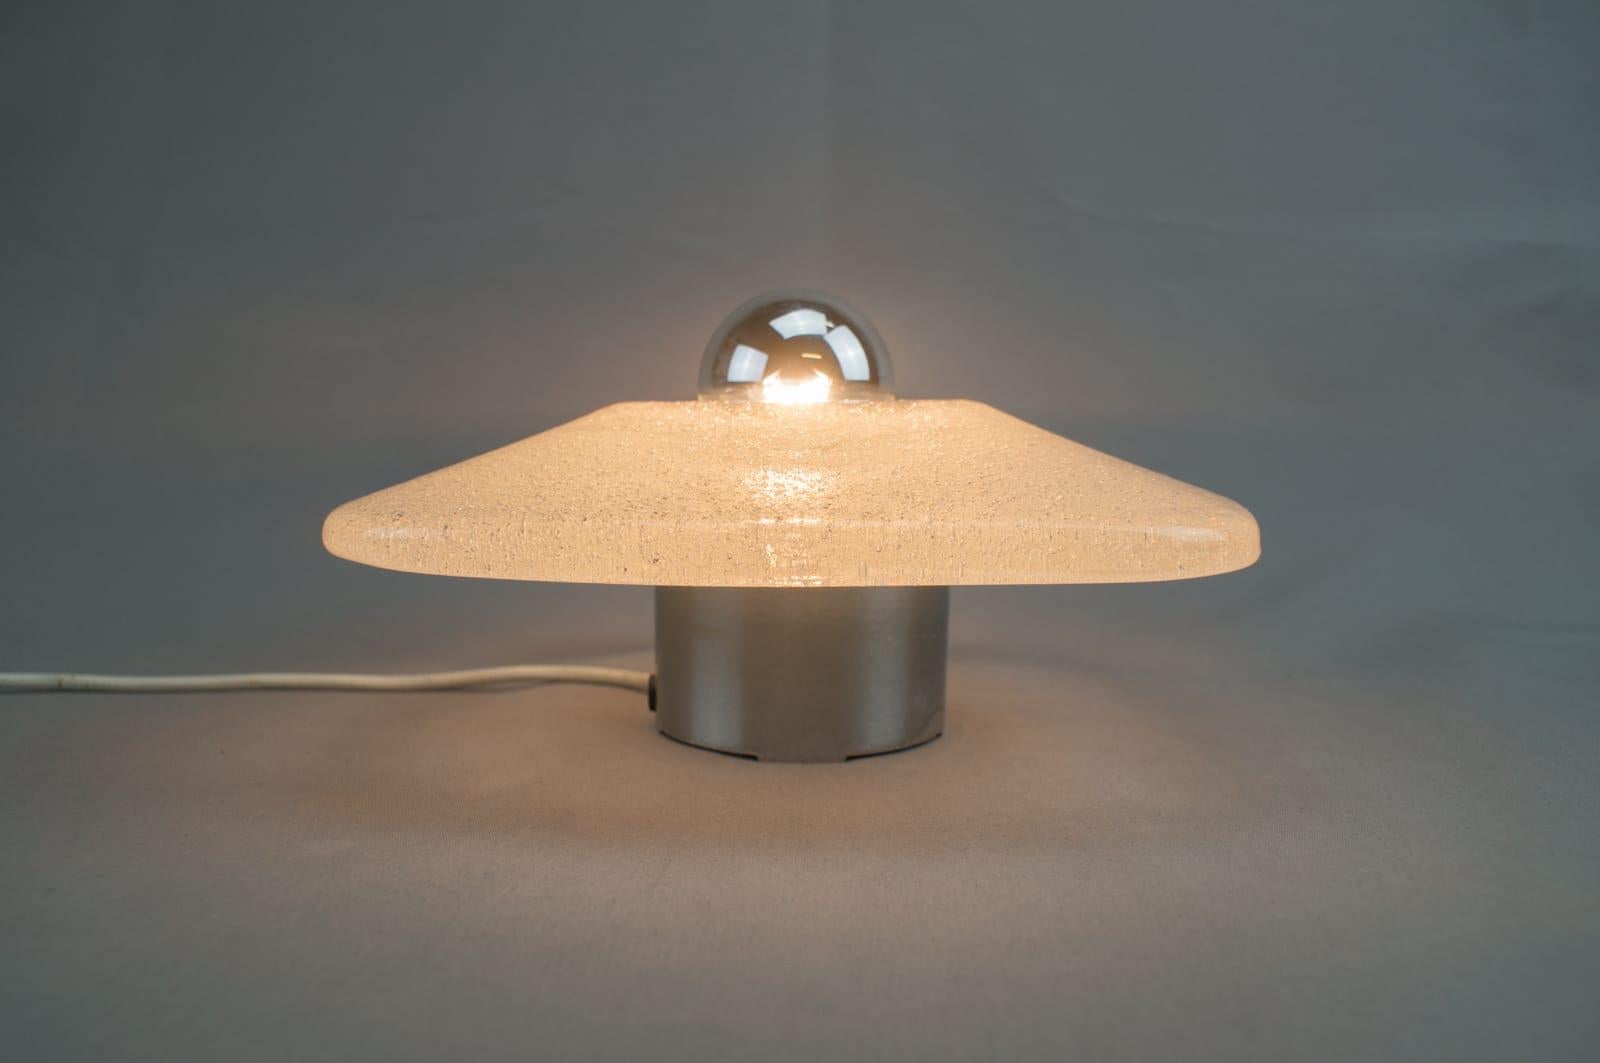 Heavy Ice Glass Wall or Ceiling Light by Peill & Putzler, Germany, 1960s (Mitte des 20. Jahrhunderts)